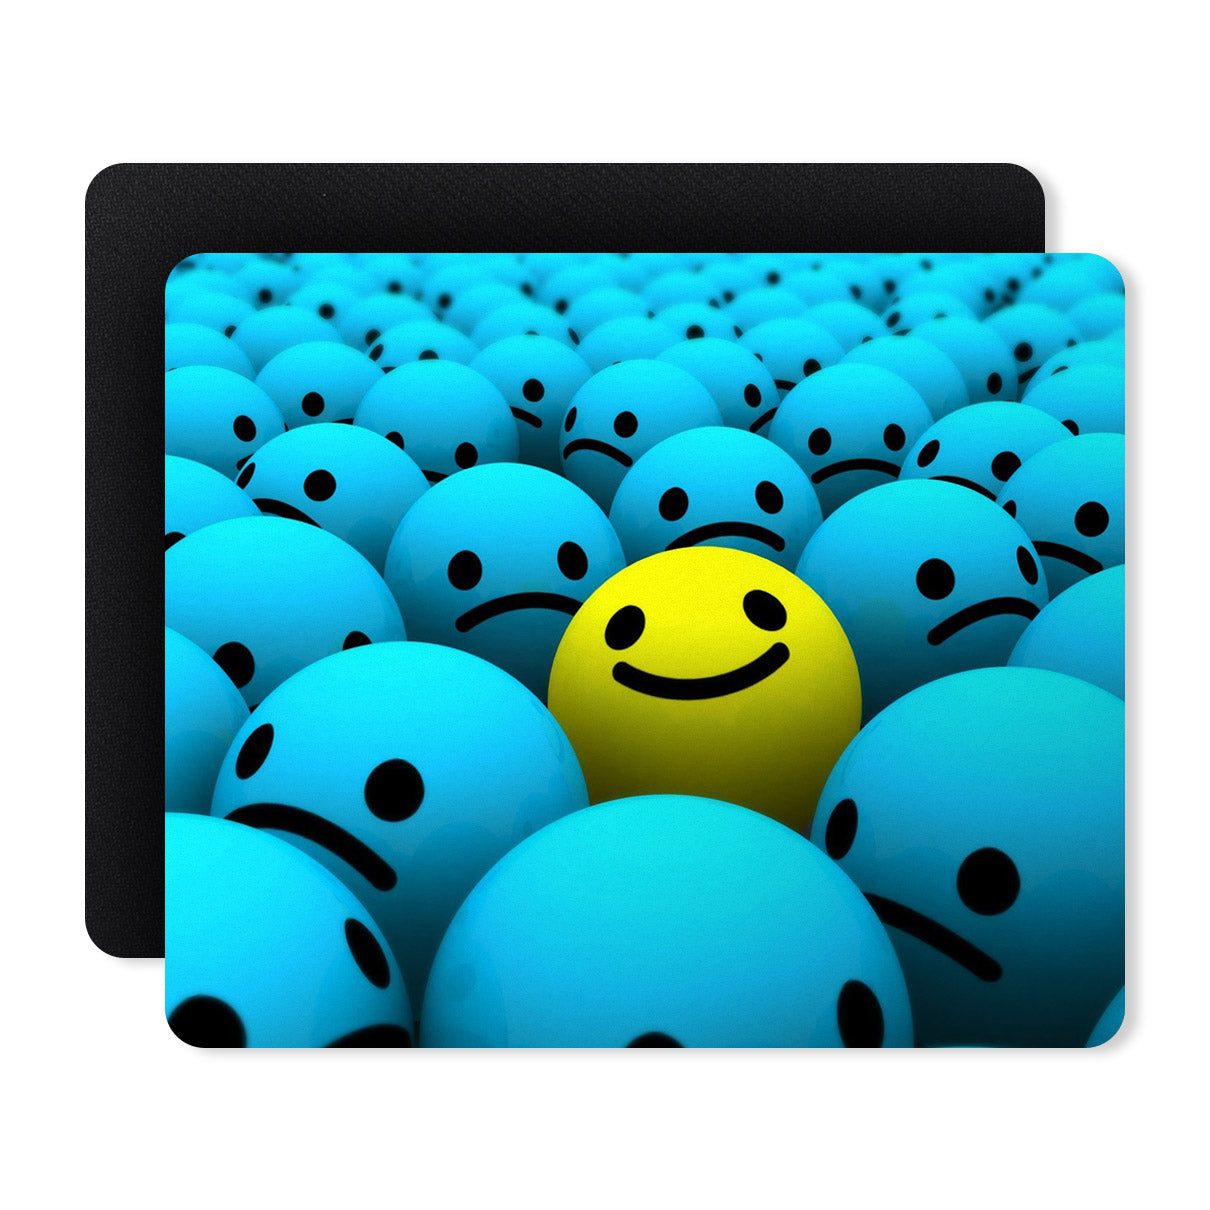 Smiley Background Designer Printed Premium Mouse pad (9 in x 7.5 in)